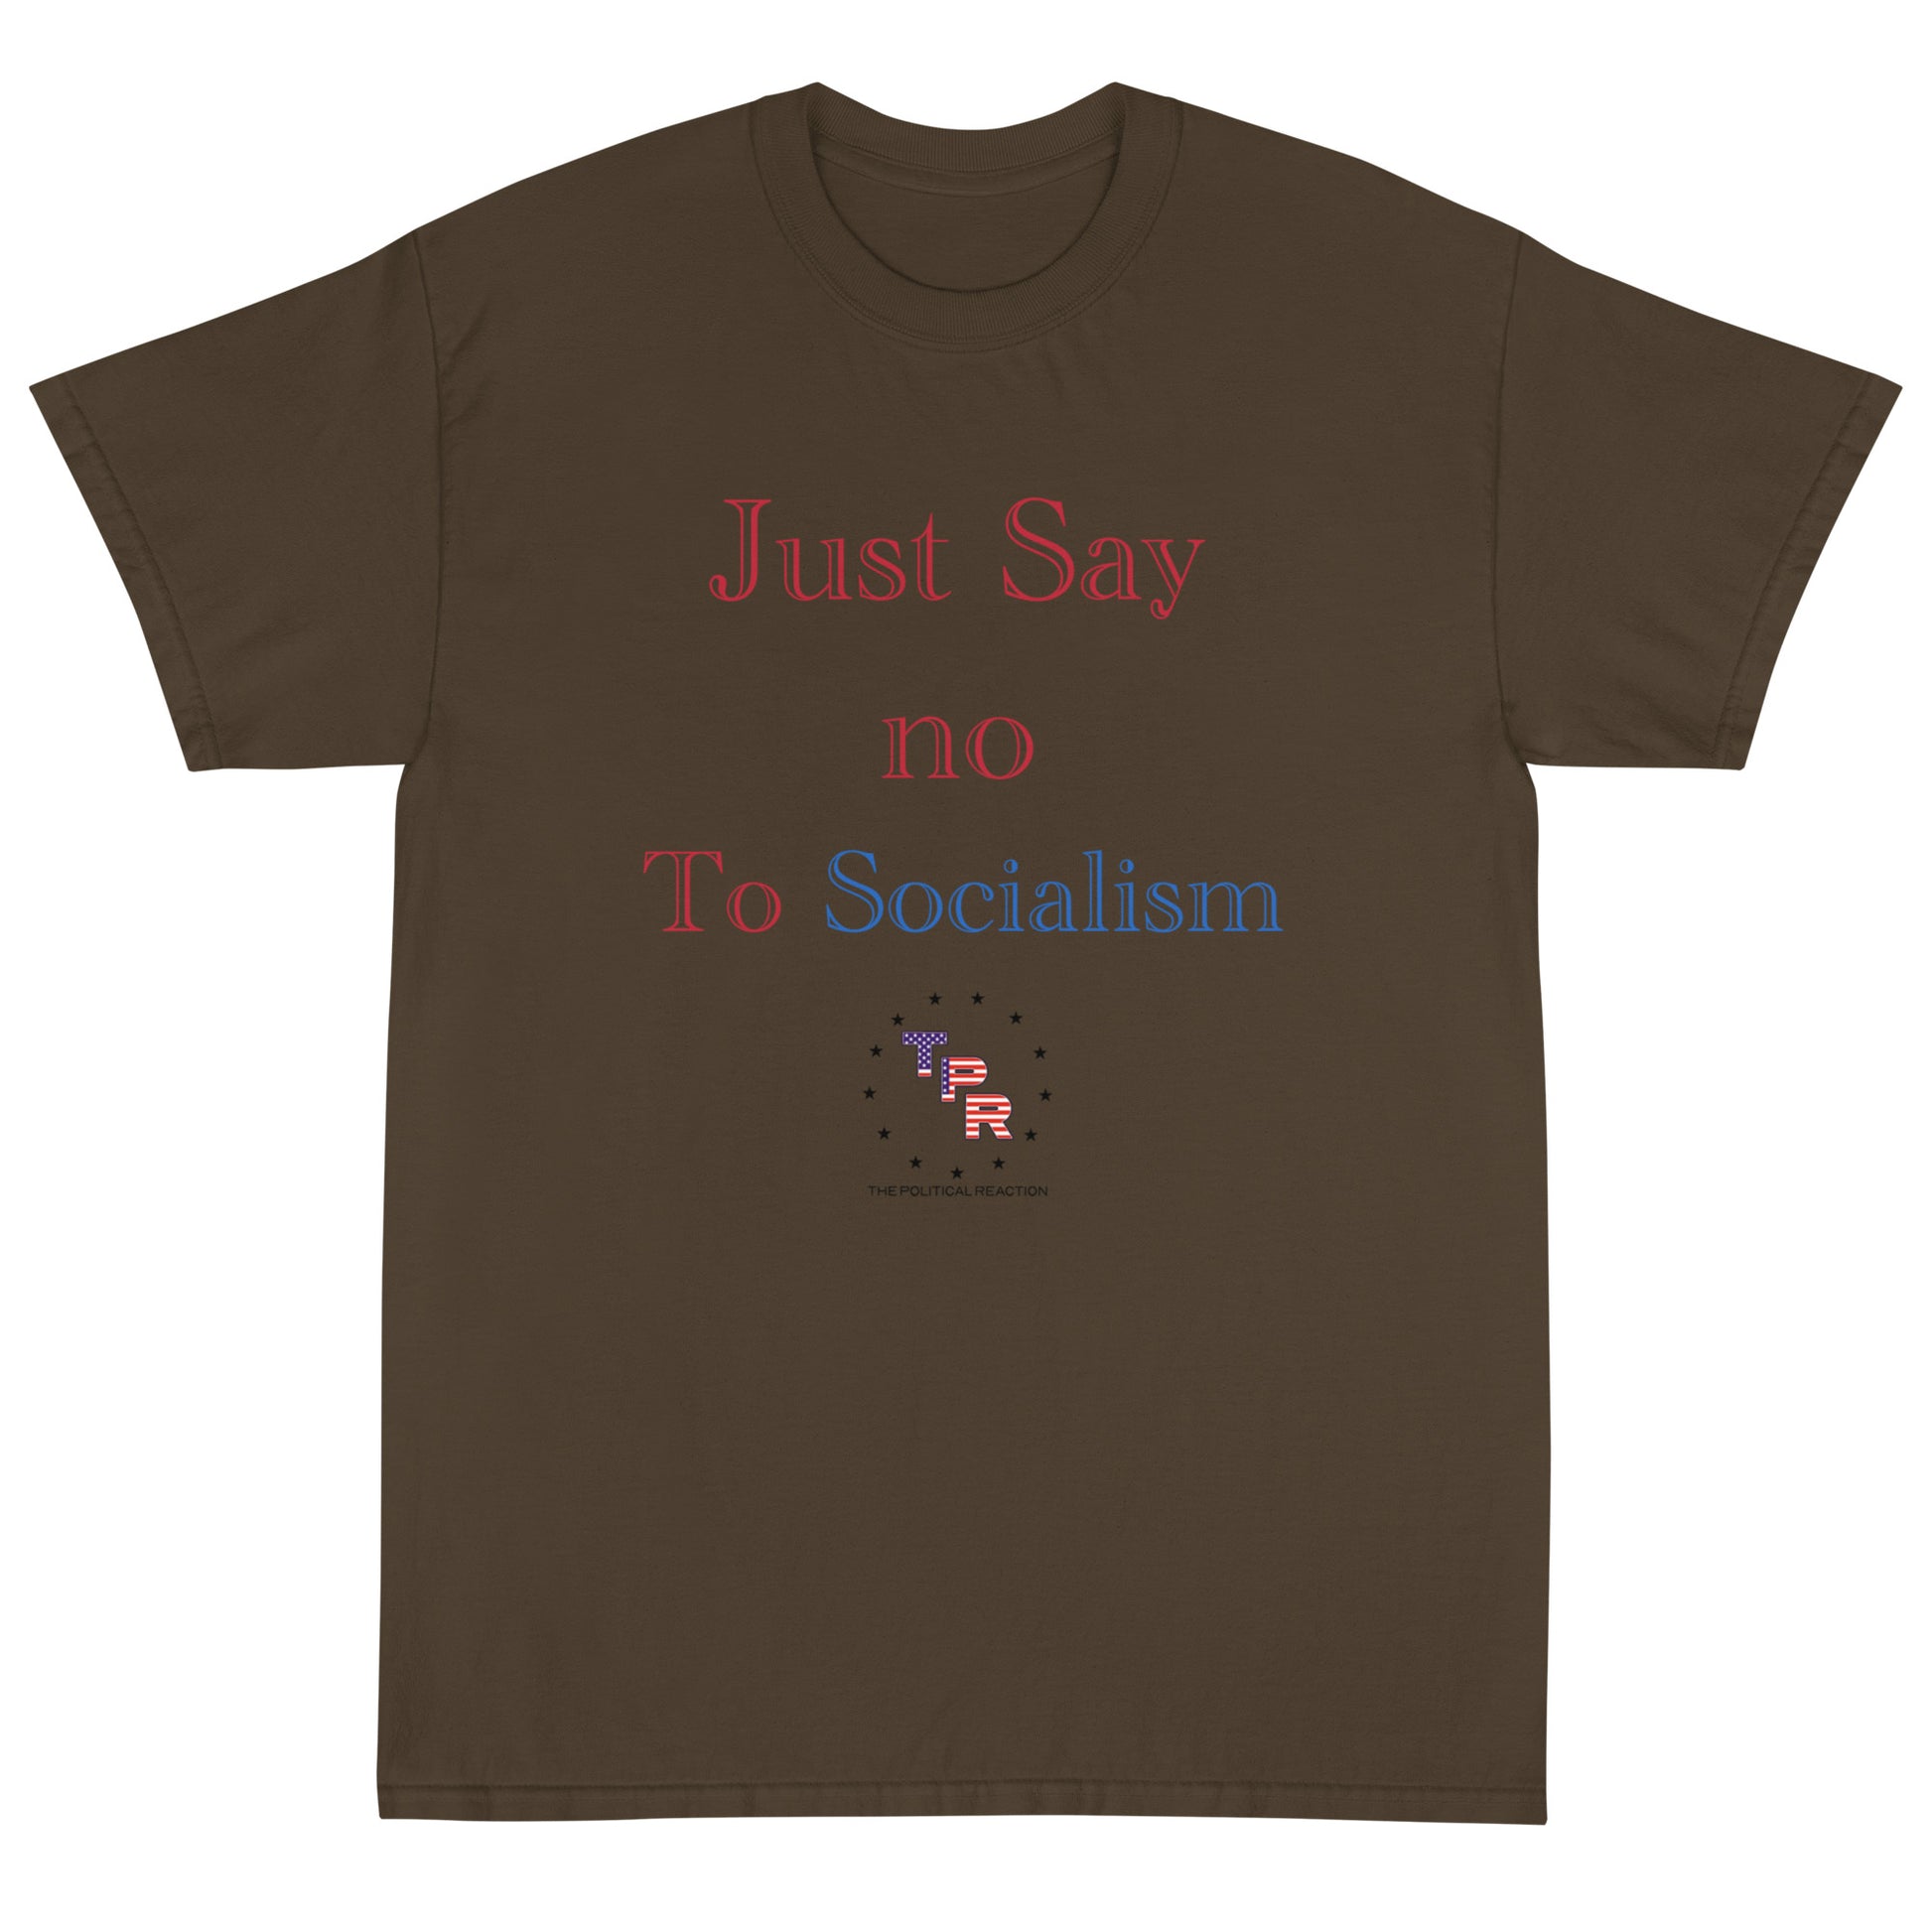 Just-say-no-to-socialism-t-shirt-Olive